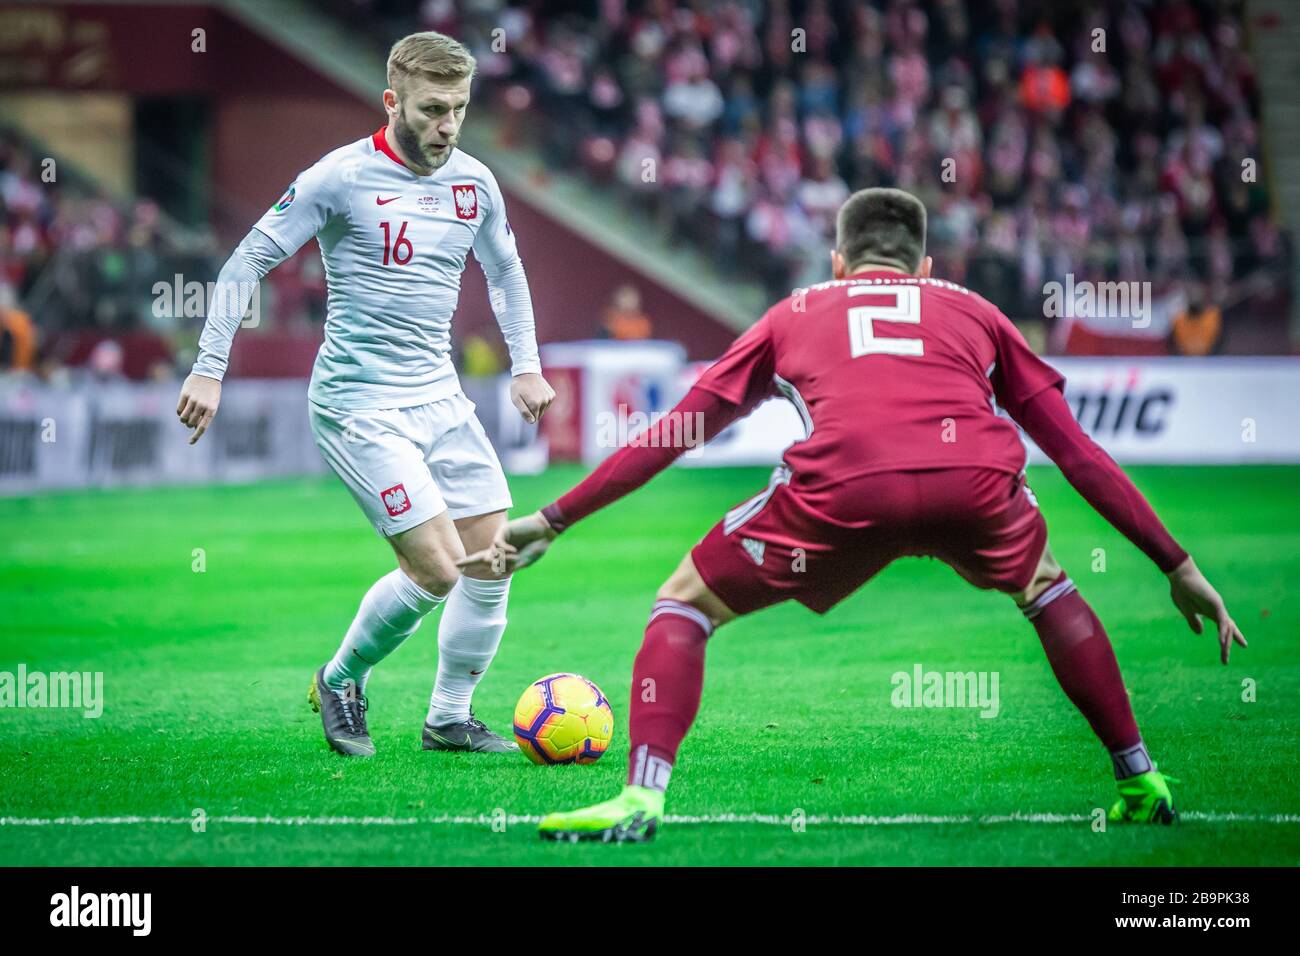 Jakub Blaszczykowski (L) of Poland and Vitalijs Maksimenko (R) of Latvia are seen in action during the UEFA EURO 2020 Qualifiers (Group D) match between Poland and Latvia at PGE Narodowy Stadium.(Final score; Poland 2:0 Latvia) Stock Photo